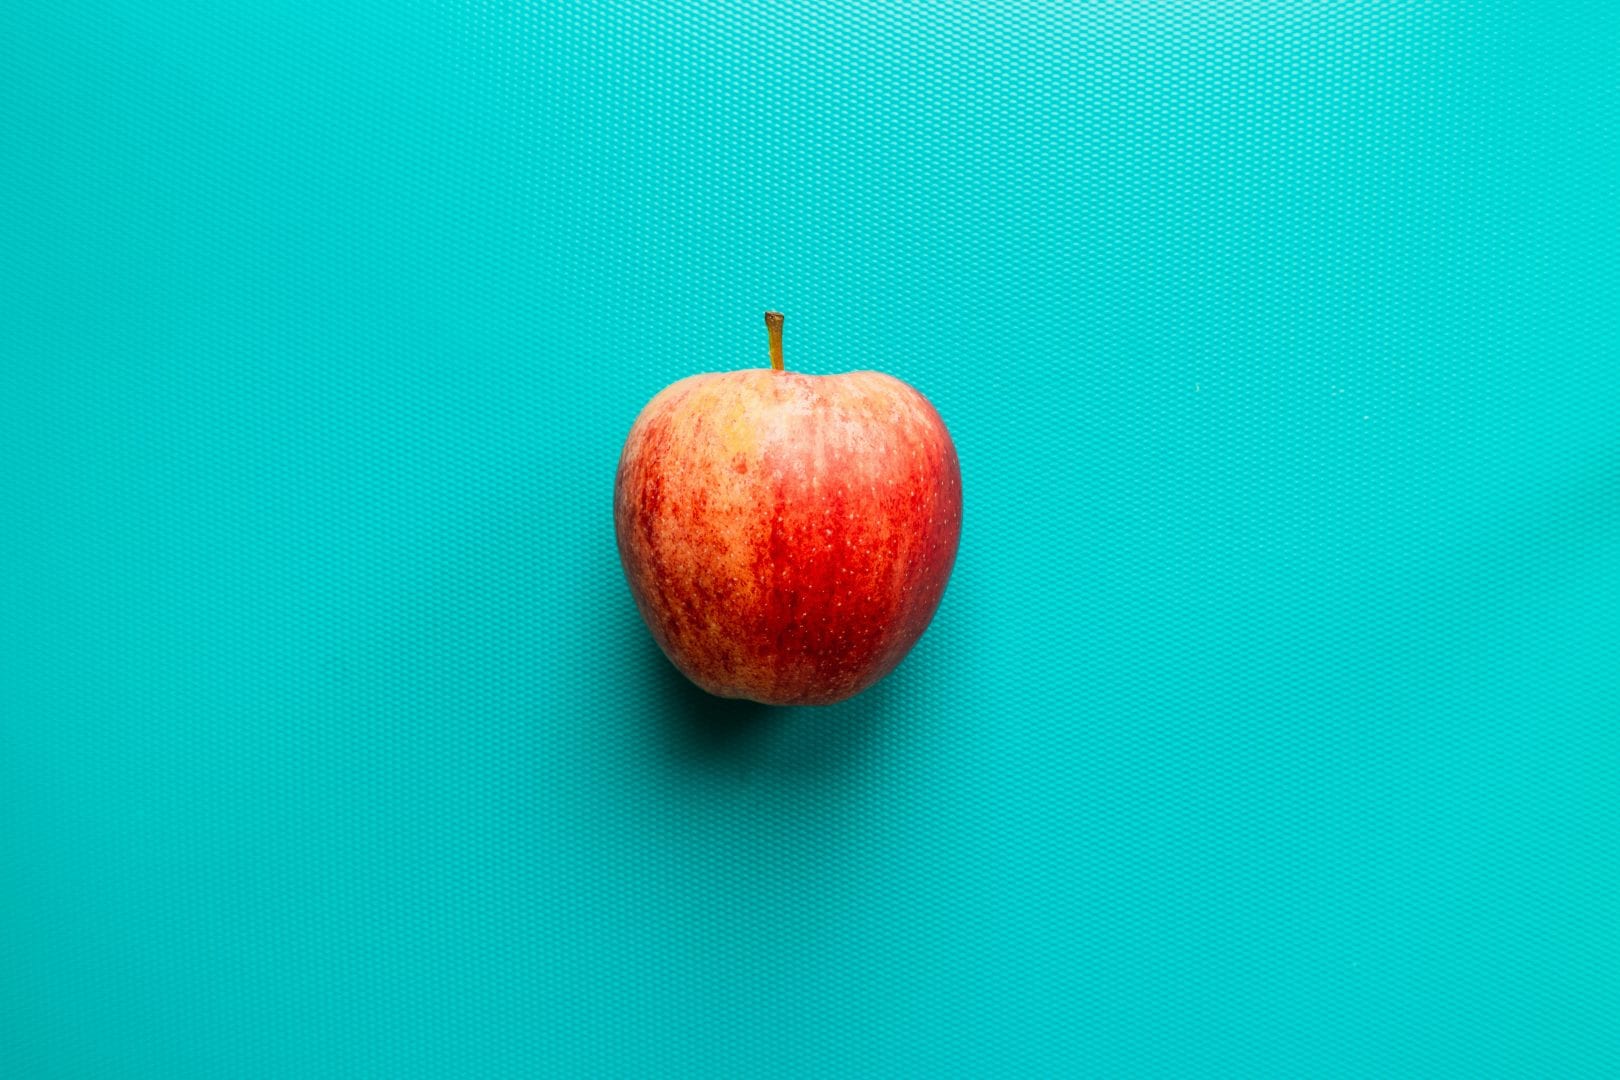 a red apple laying on a bright teal background